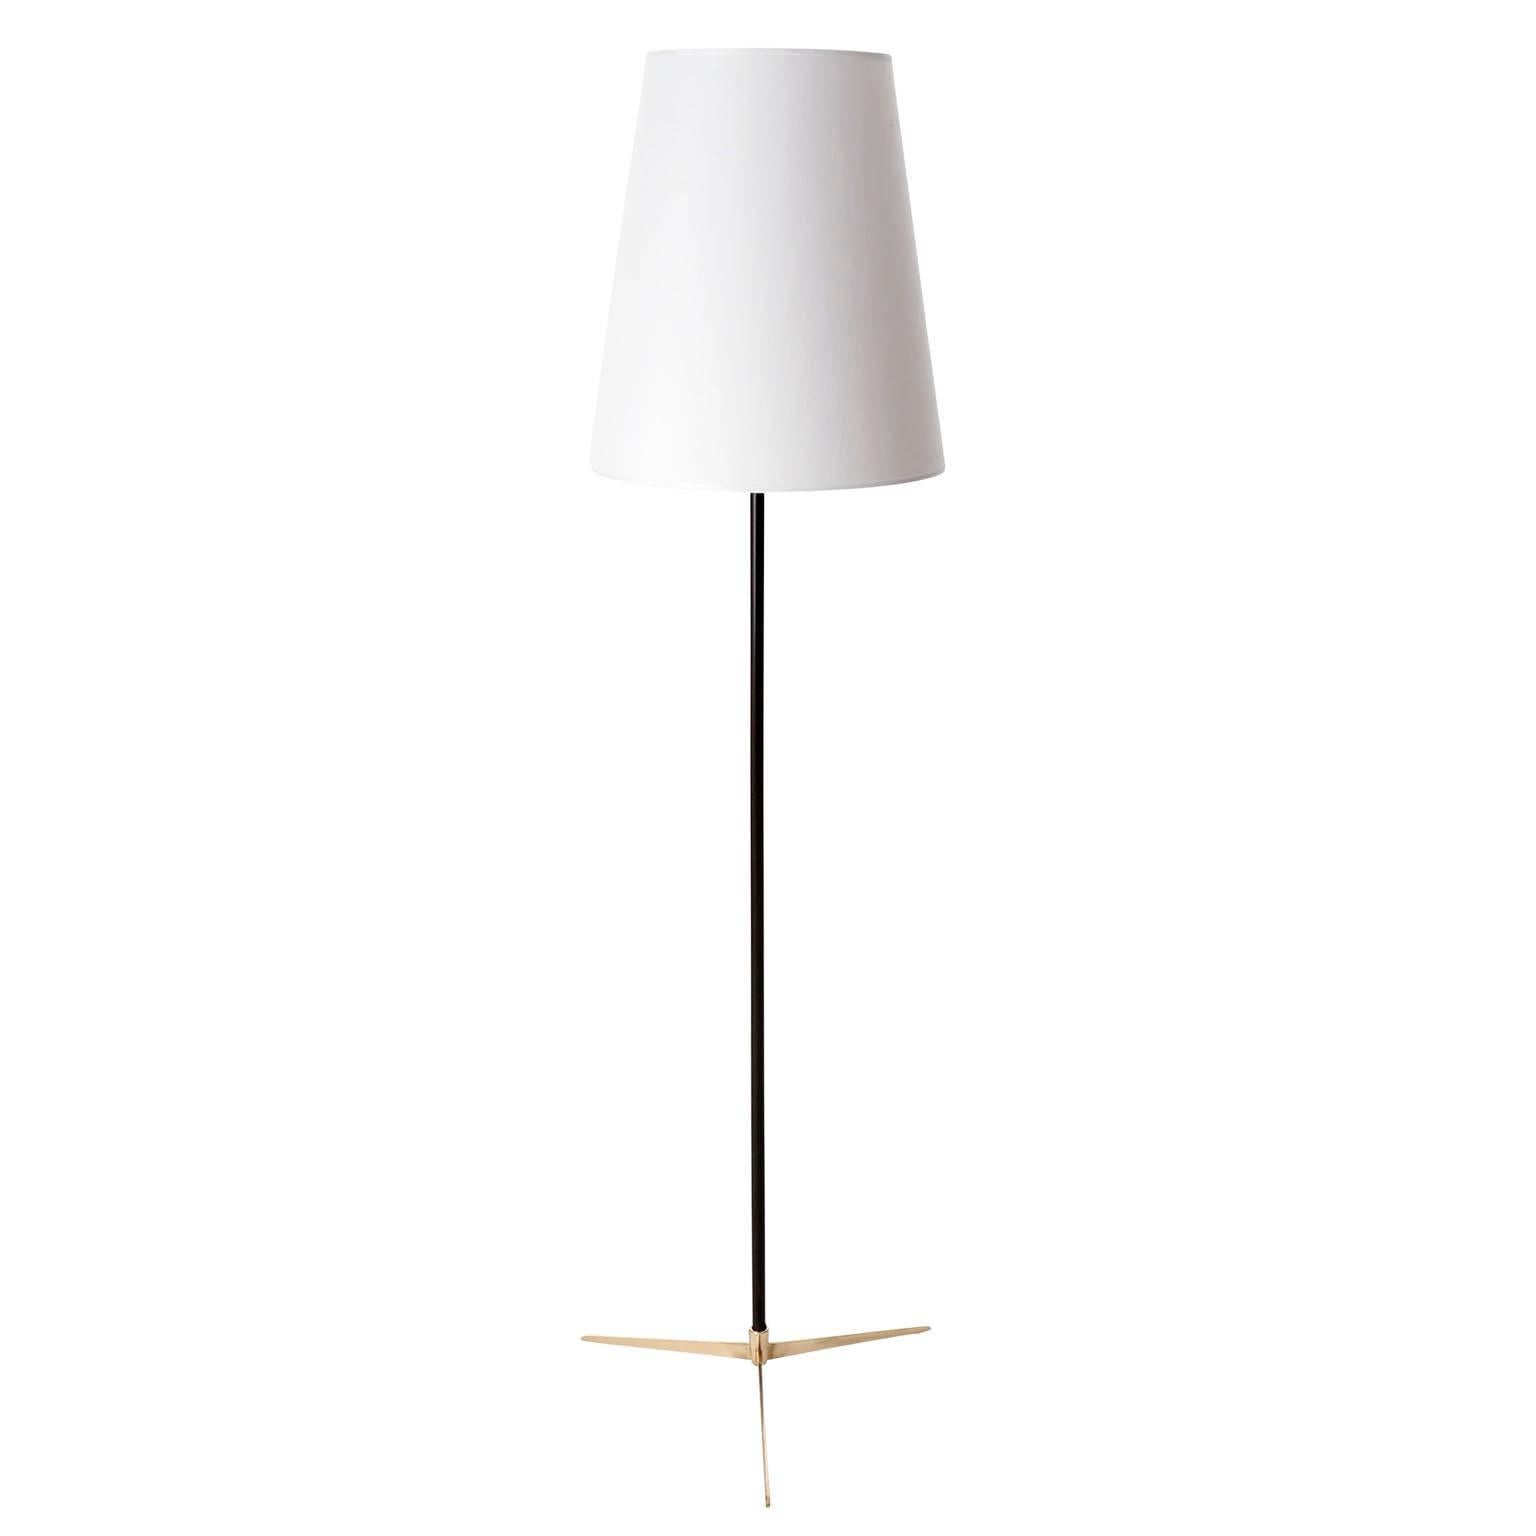 A floor lamp model 'Micheline' (model no. 2092) by J.T. Kalmar, Vienna, Austria, manufactured in midcentury, circa 1960 (late 1950s and early 1960s).
It is made of a nice mixture of colors and materials: a polished tripod brass base, a blackened